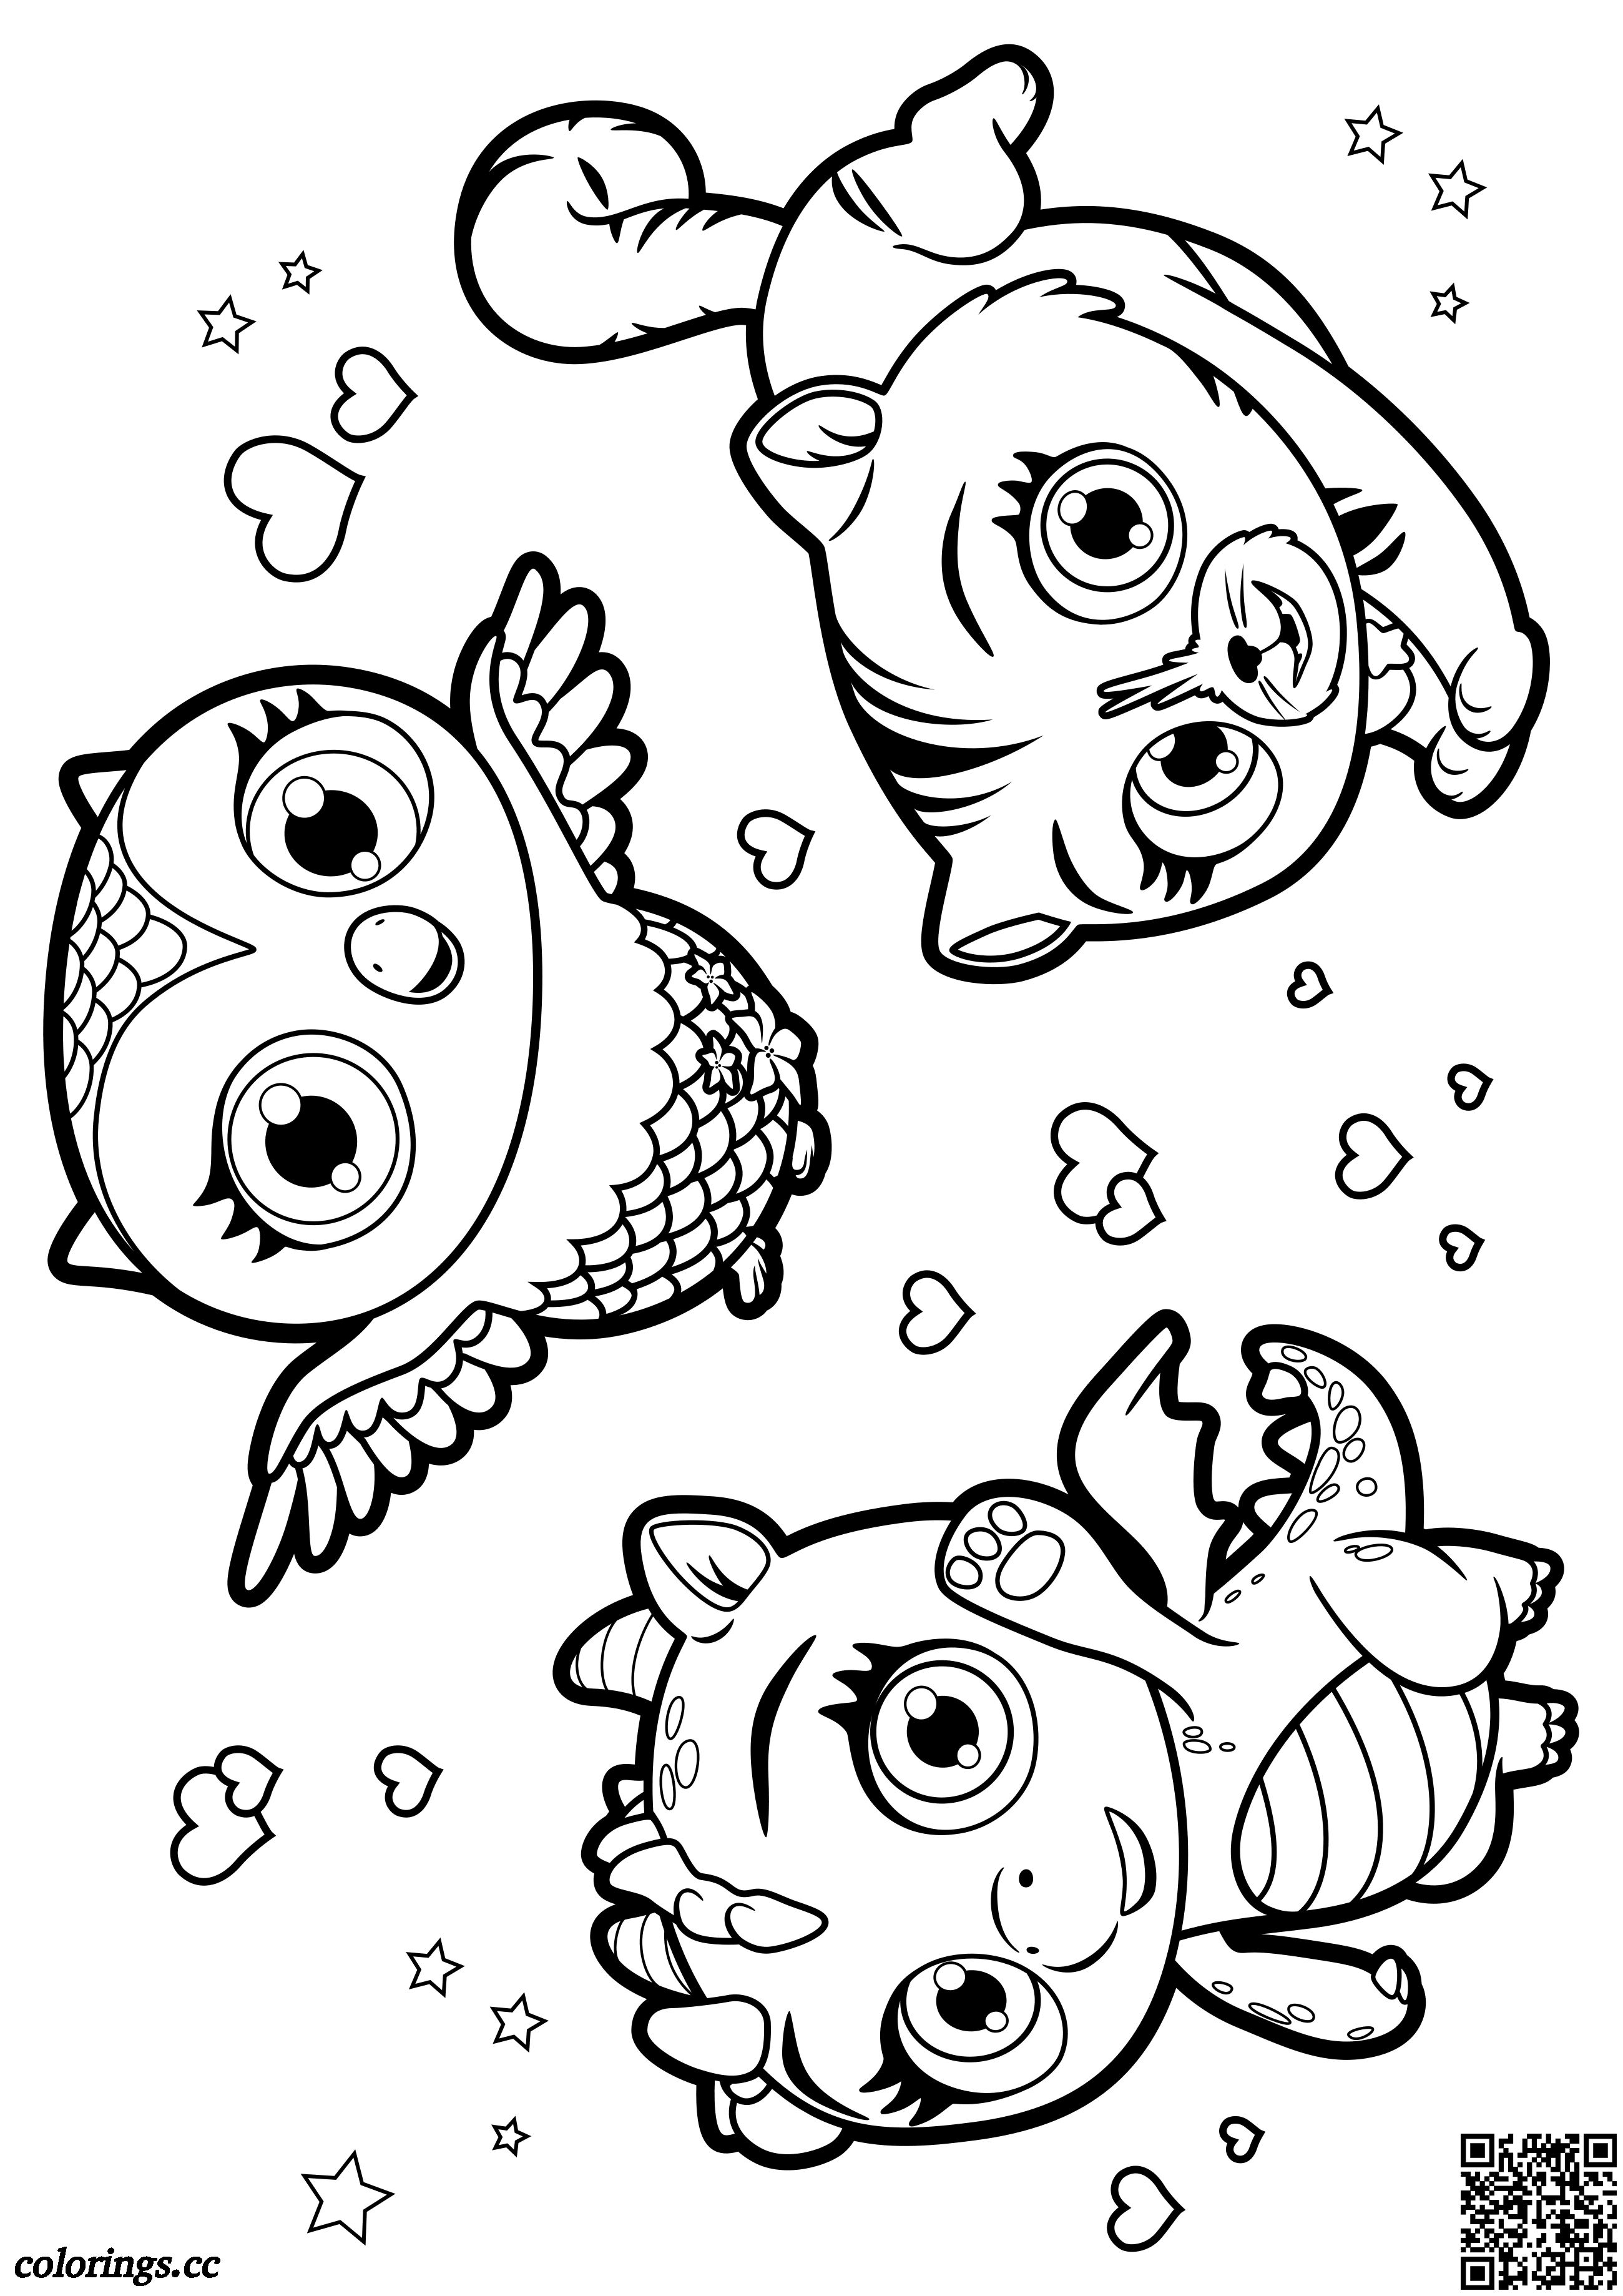 Flare, Treble and Seven coloring pages, Little fairies coloring pages